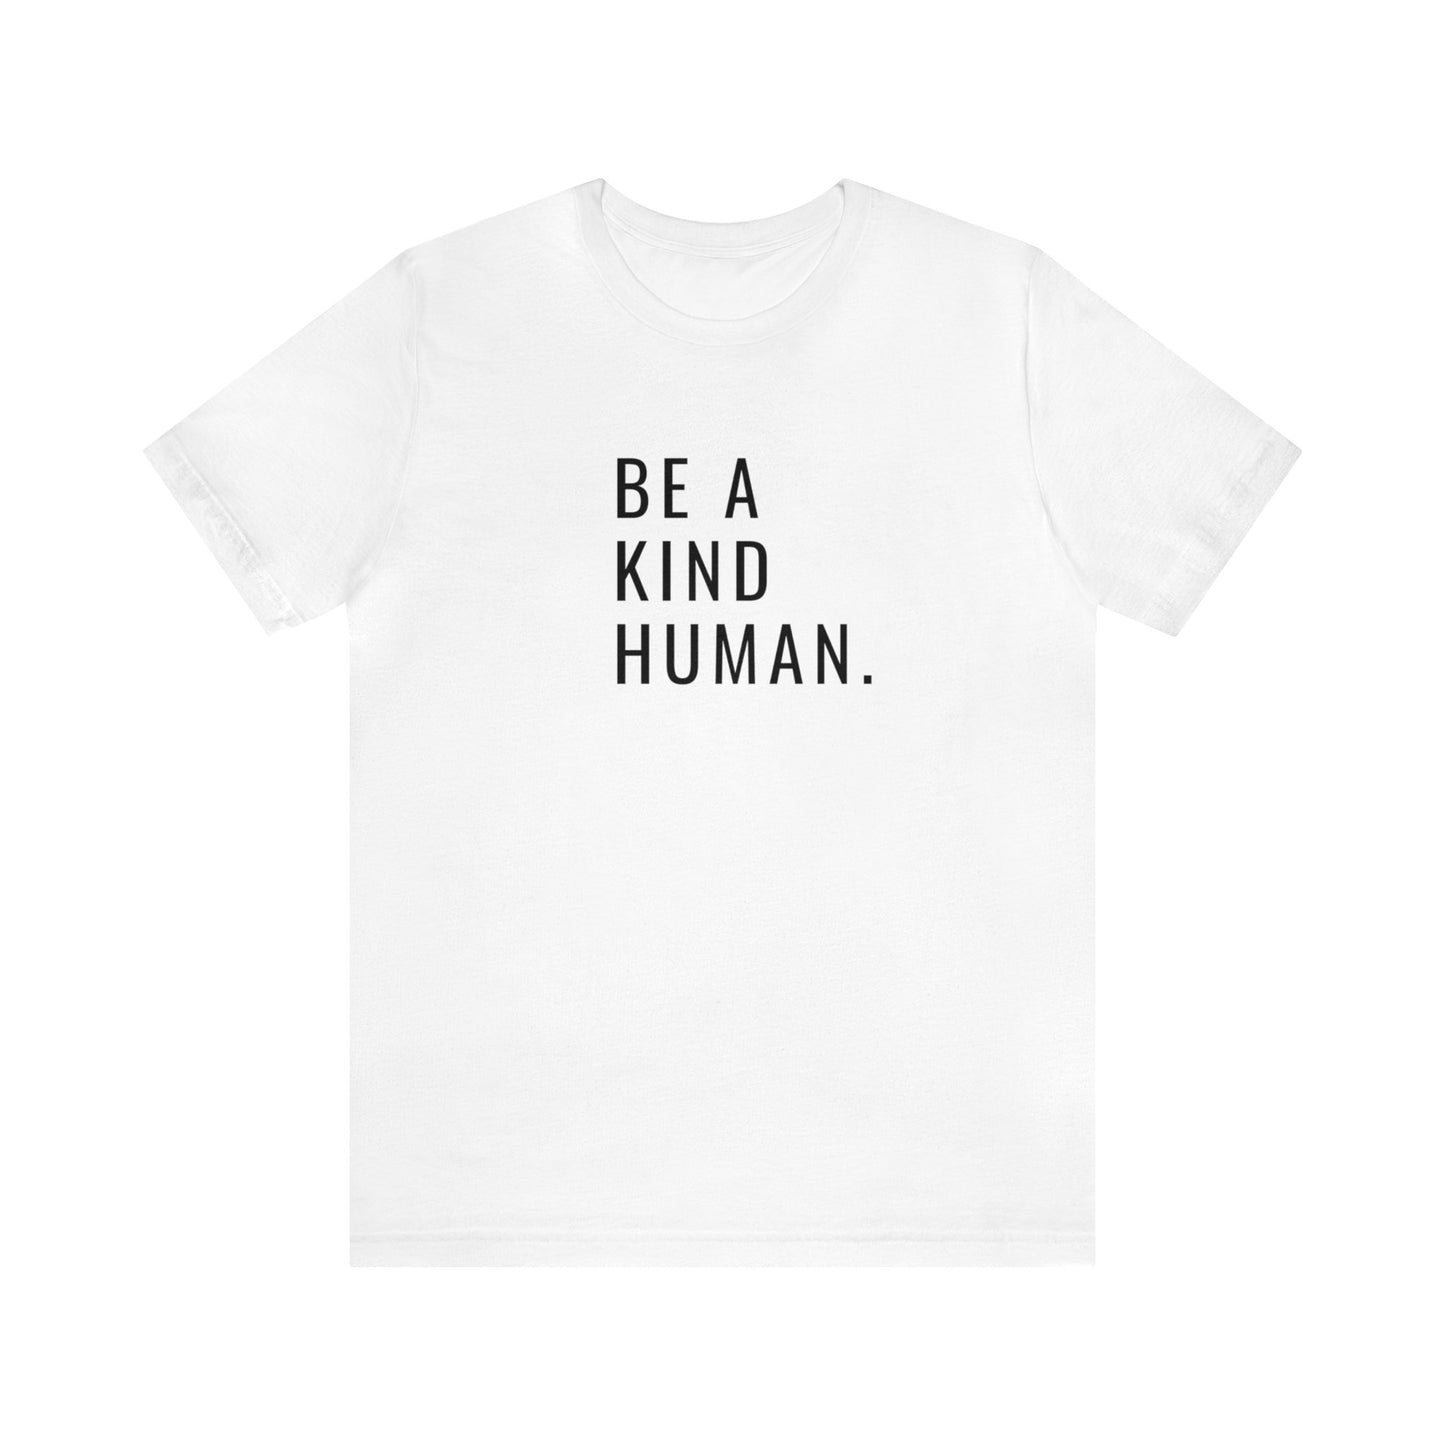 'Be a Kind Human' Unisex Cotton T-shirt - Human Rights Fighter Collection